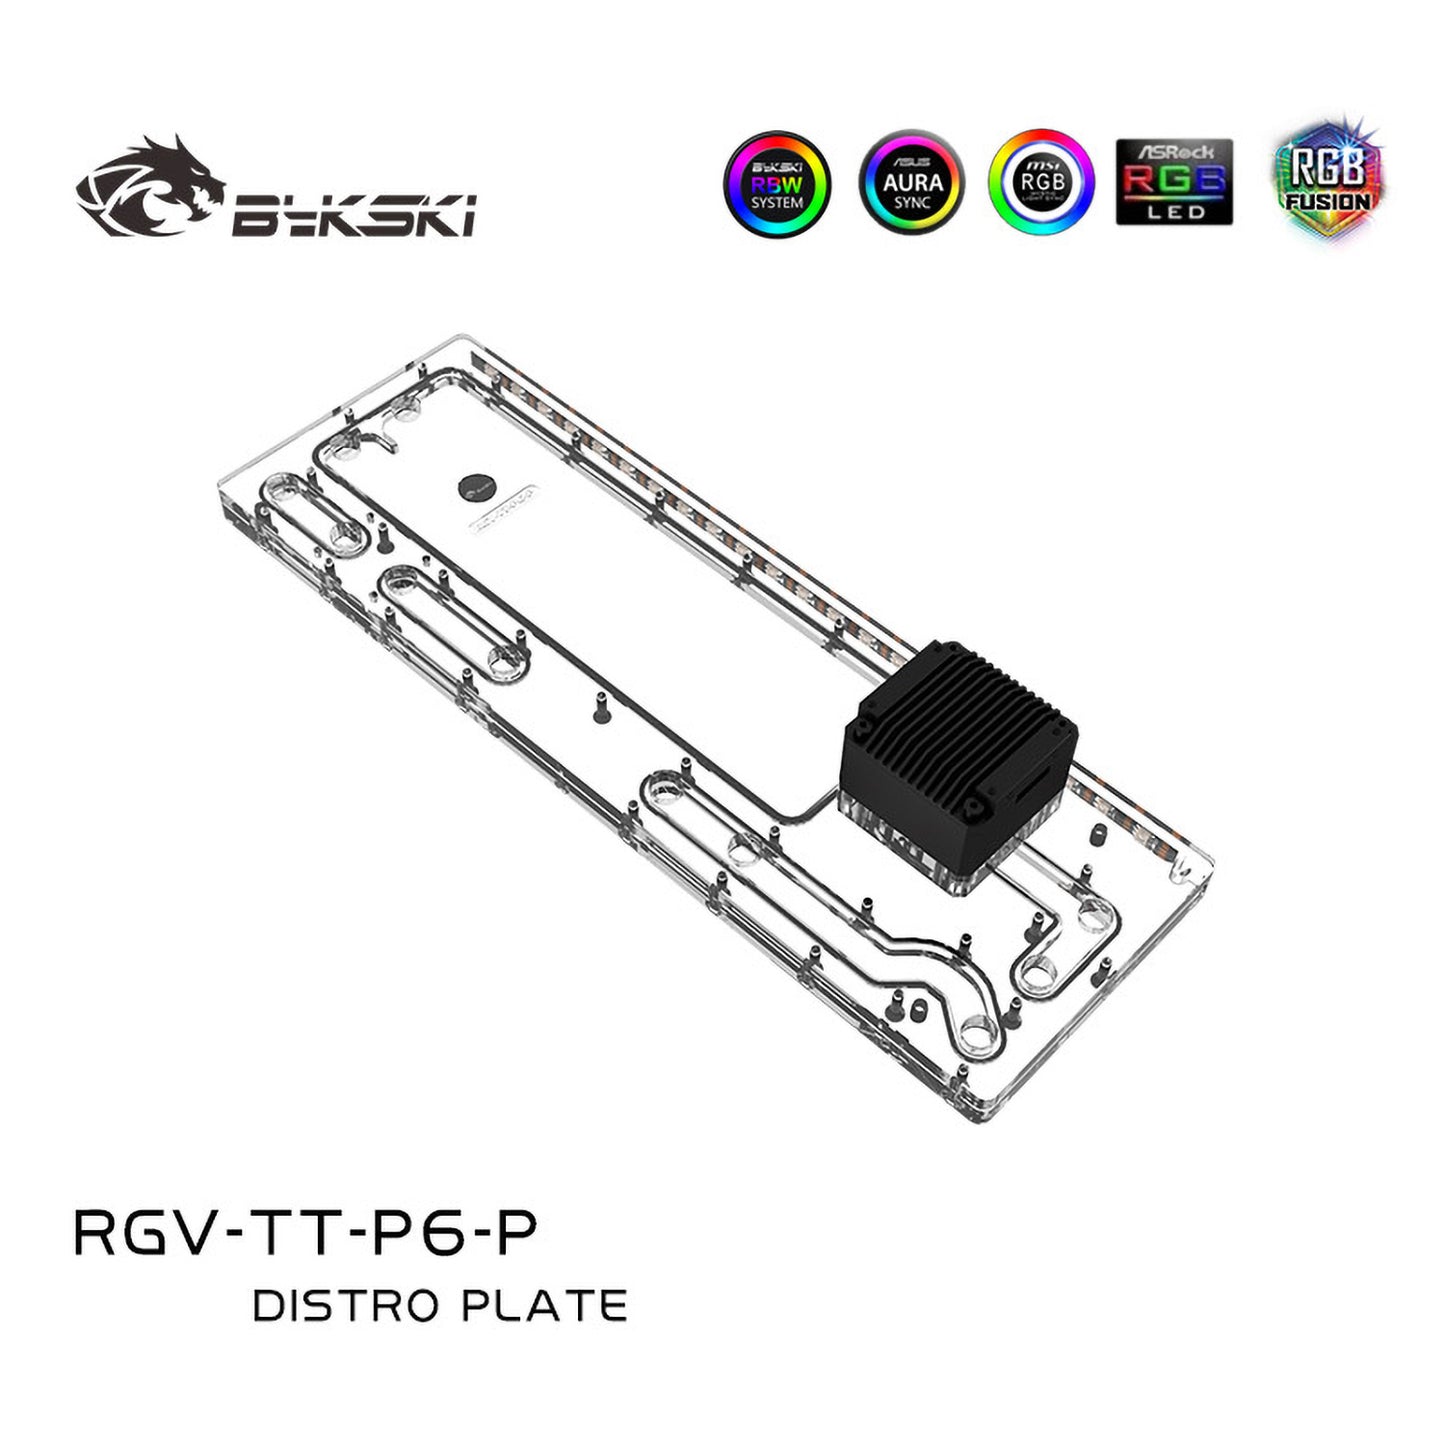 Bykski Distro Plate Kit For Thermaltake Core P6 TG Case, 5V A-RGB Complete Loop For Single GPU PC Building, Water Cooling Waterway Board, RGV-TT-P6-P